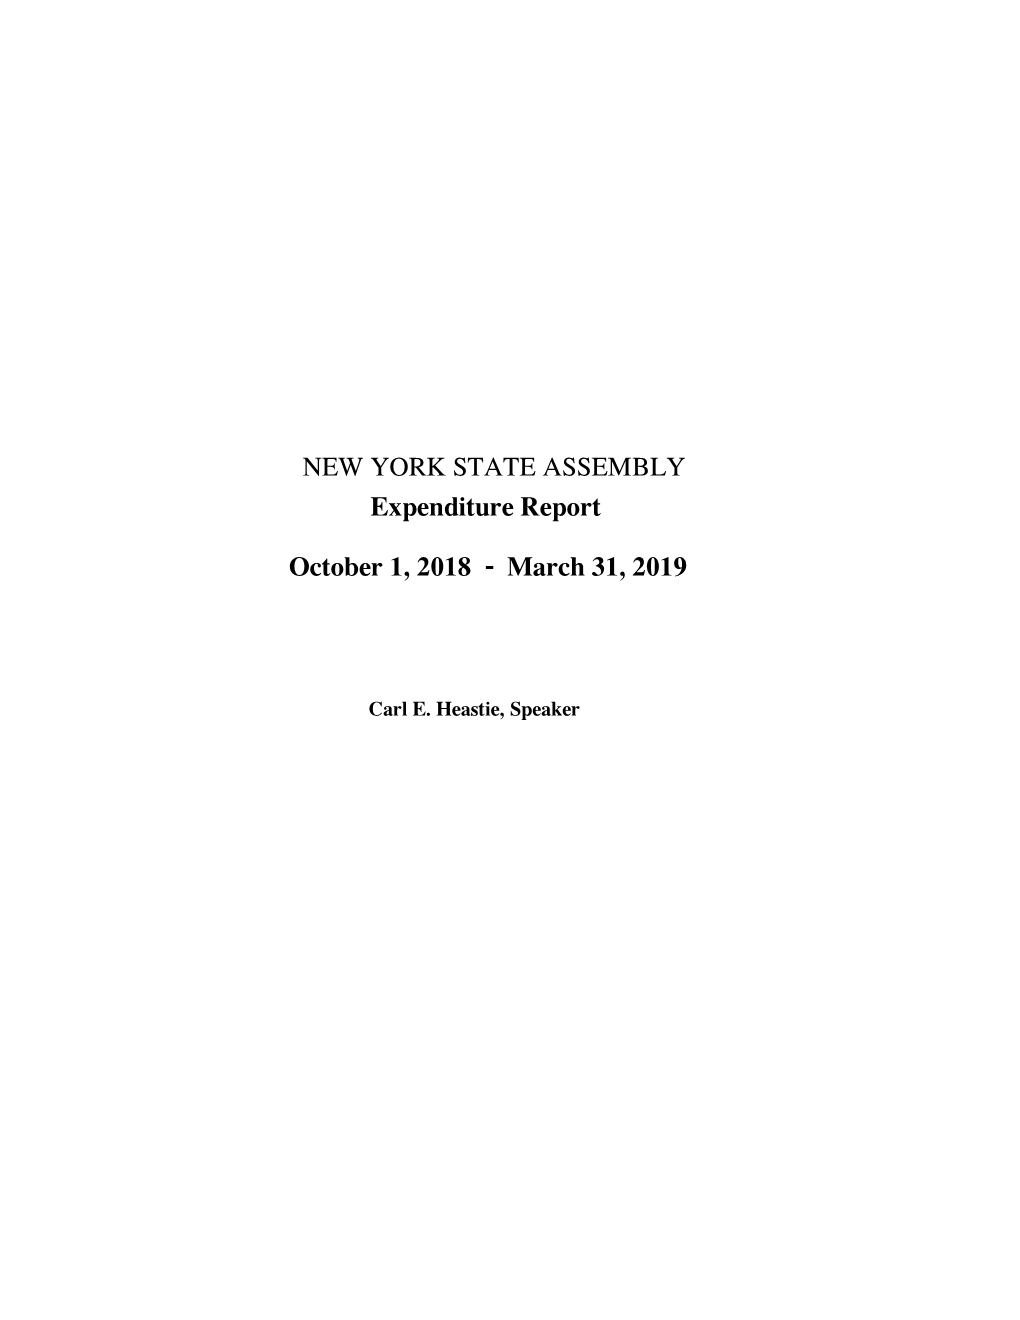 NEW YORK STATE ASSEMBLY Expenditure Report October 1